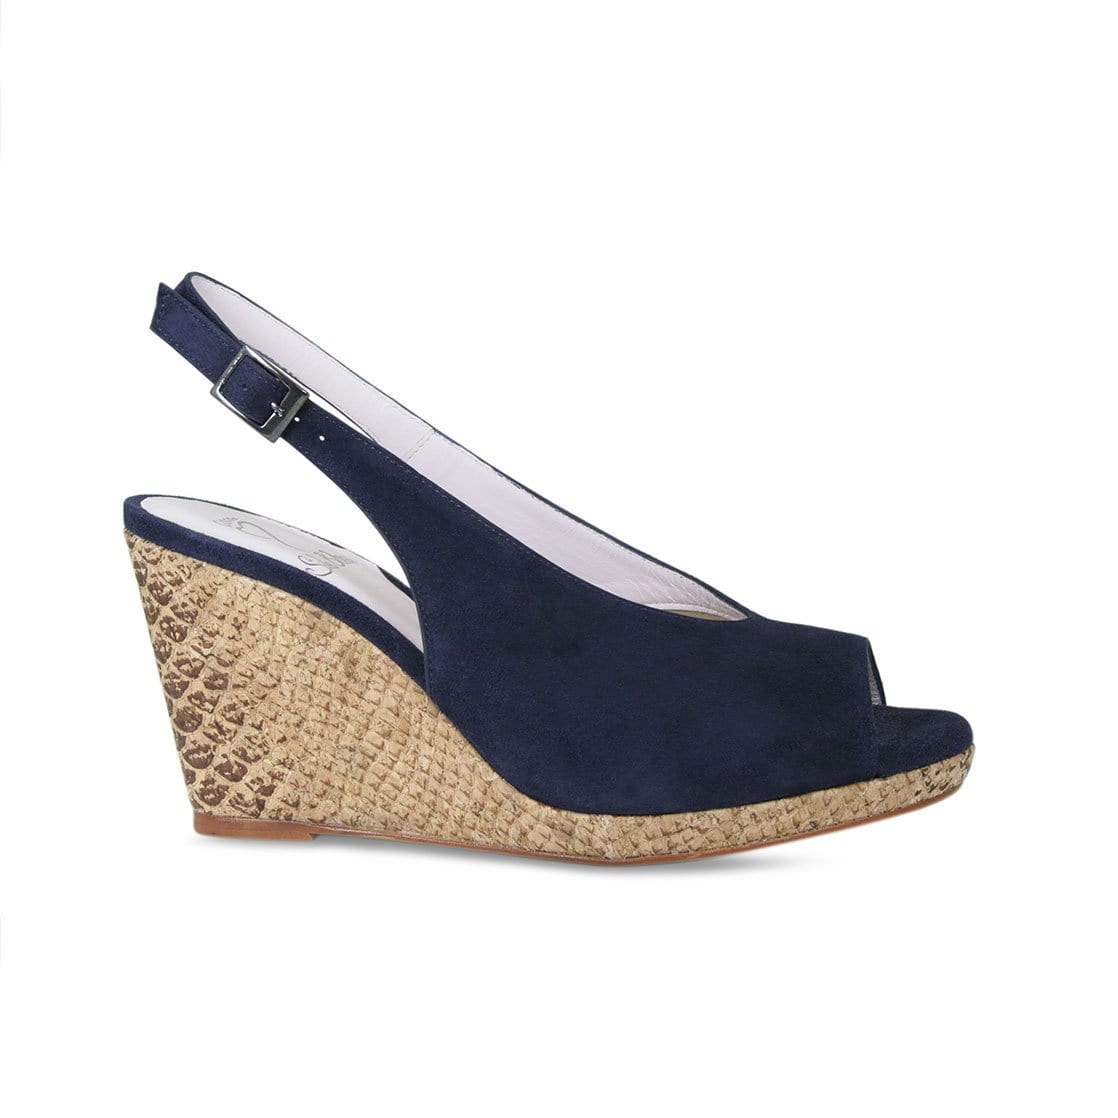 Willow: Navy Suede – Best Wedges for 